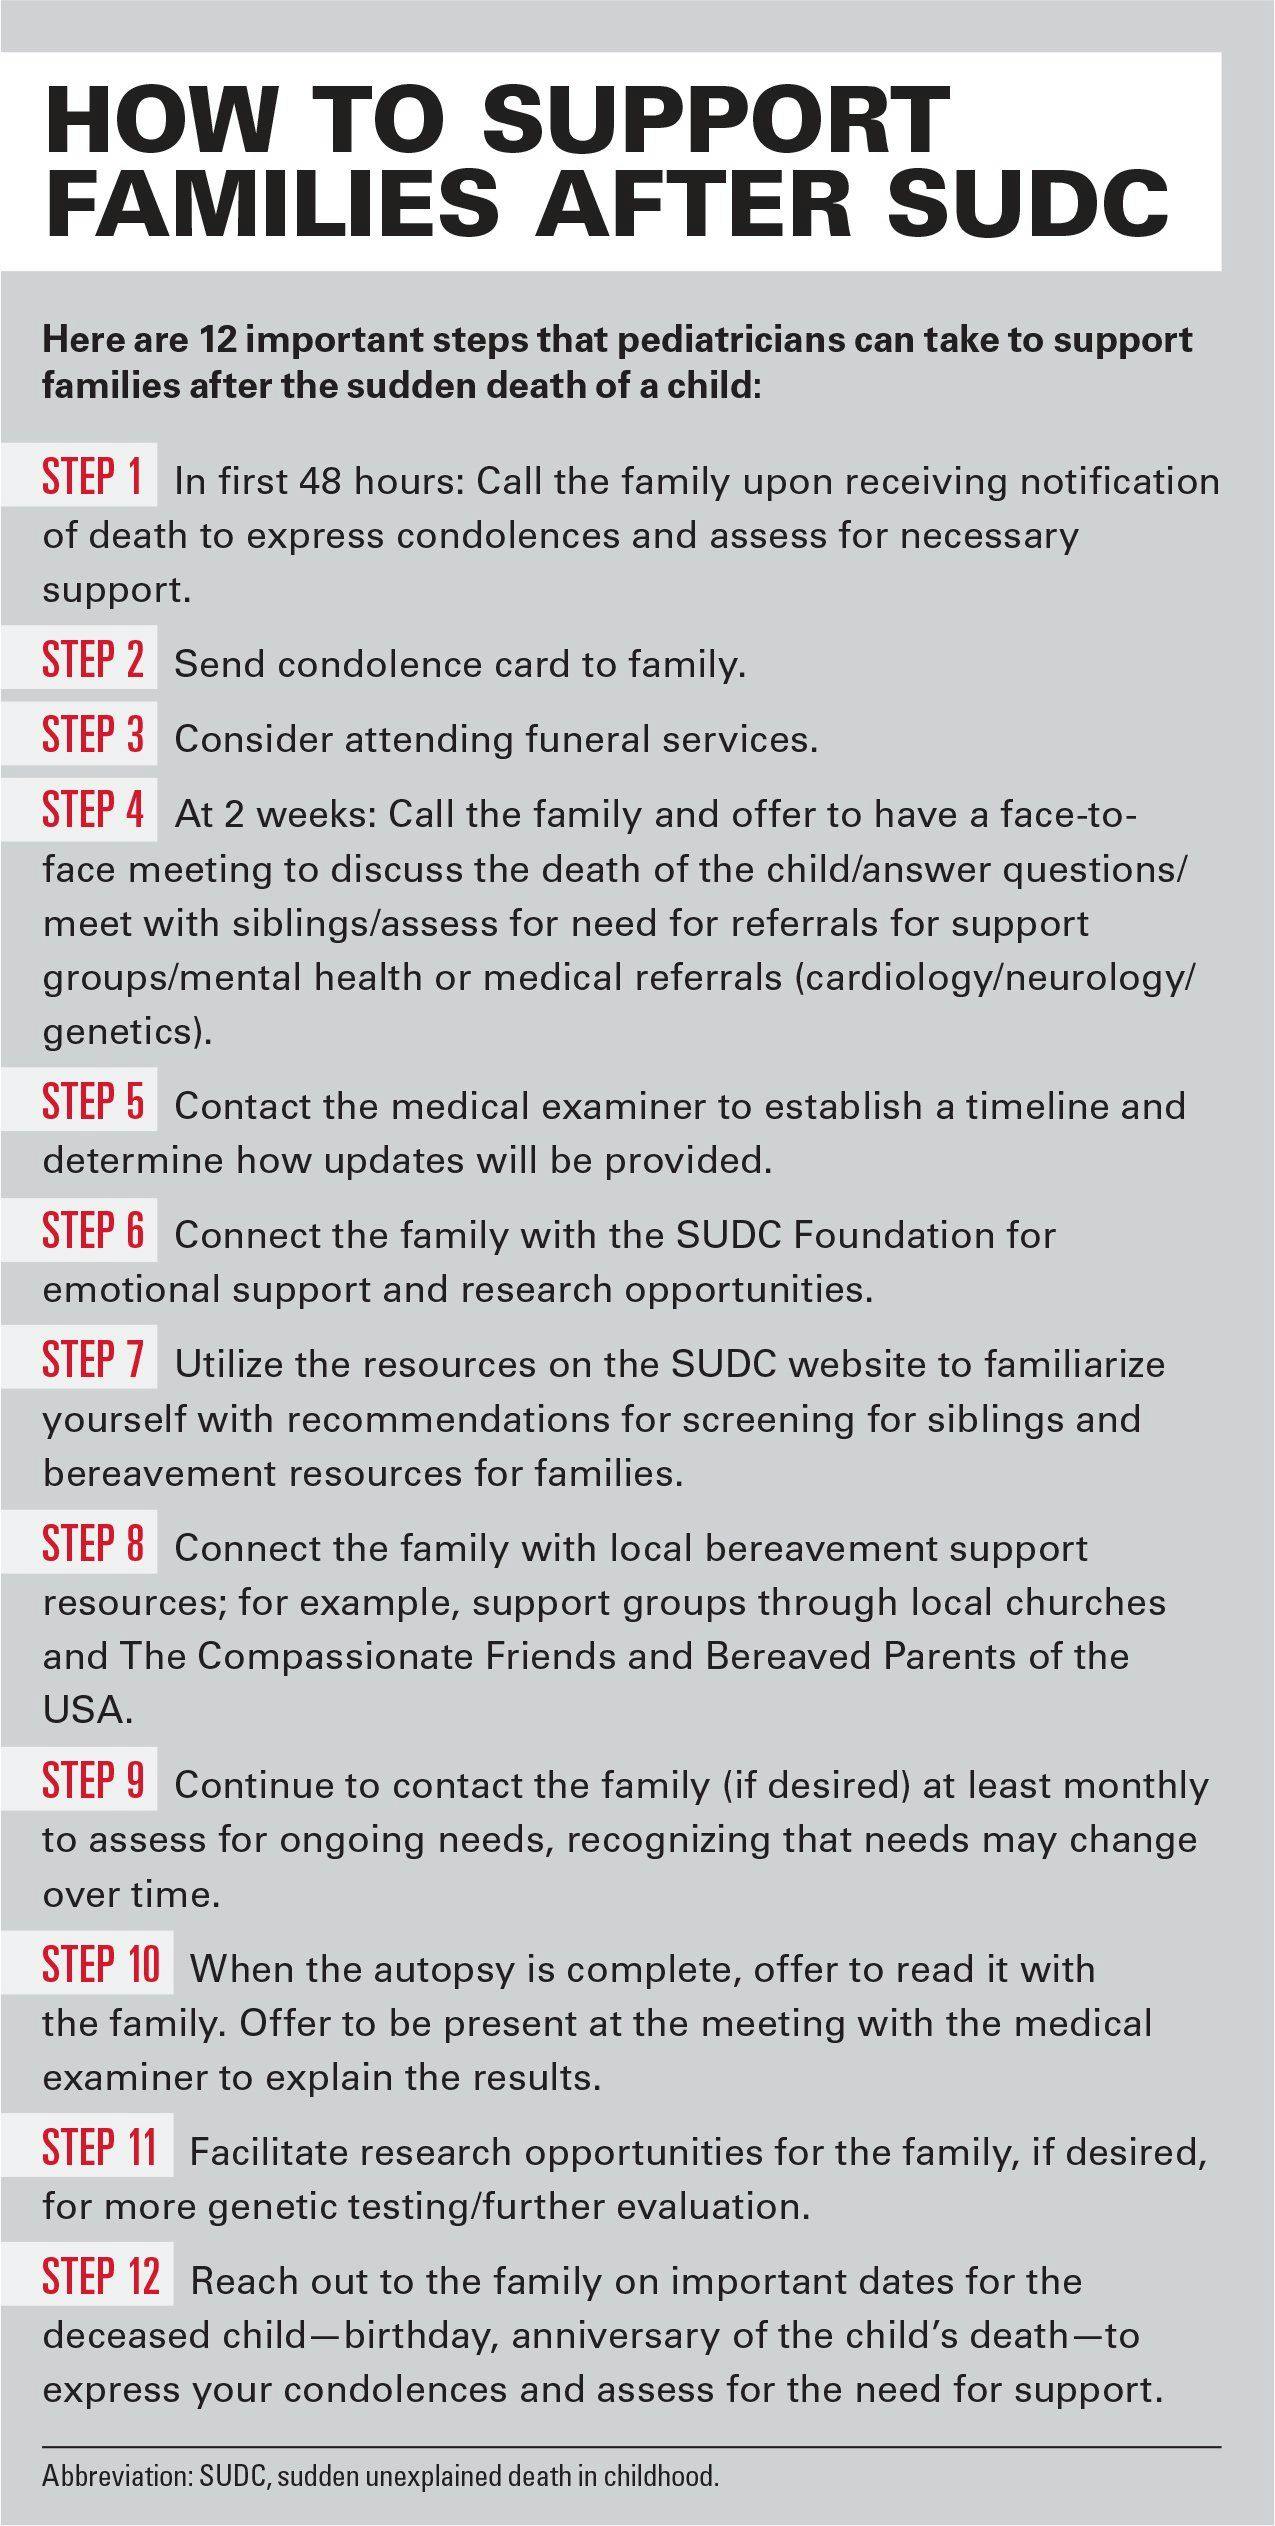 How to support families after SUDC